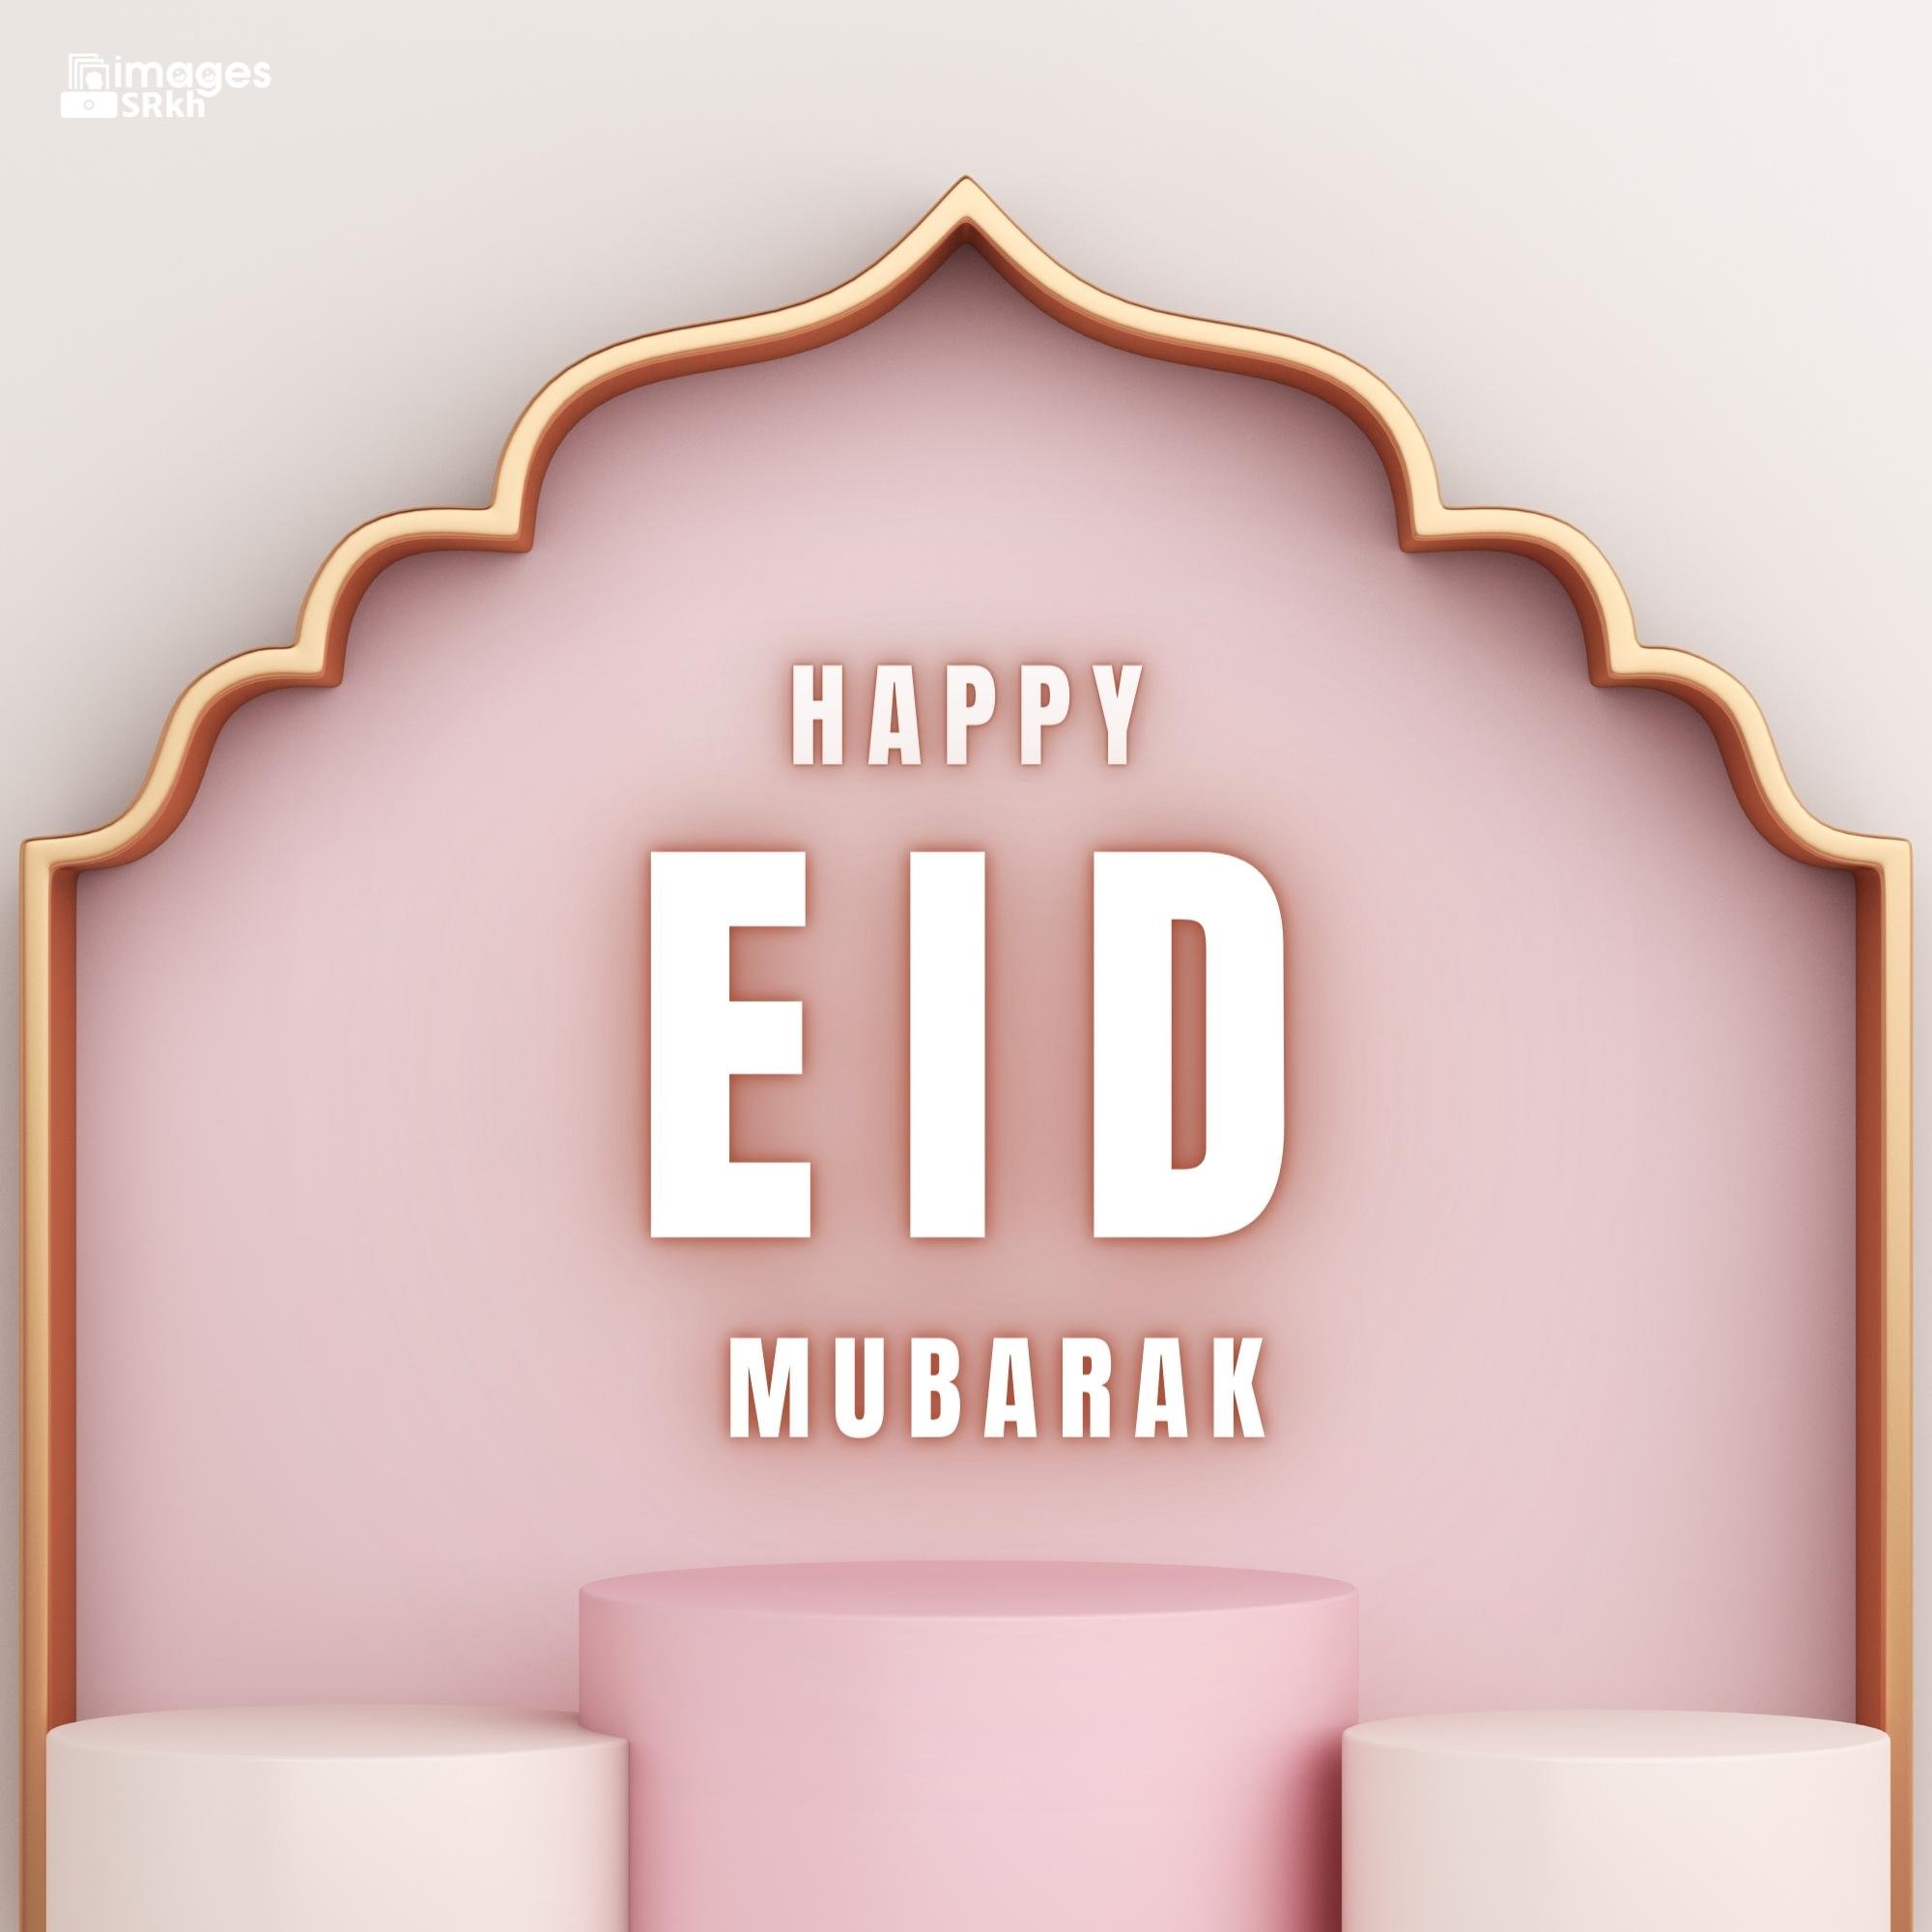 Hd Images Of Eid Mubarak (3) | Download free in Hd Quality | imagesSRkh